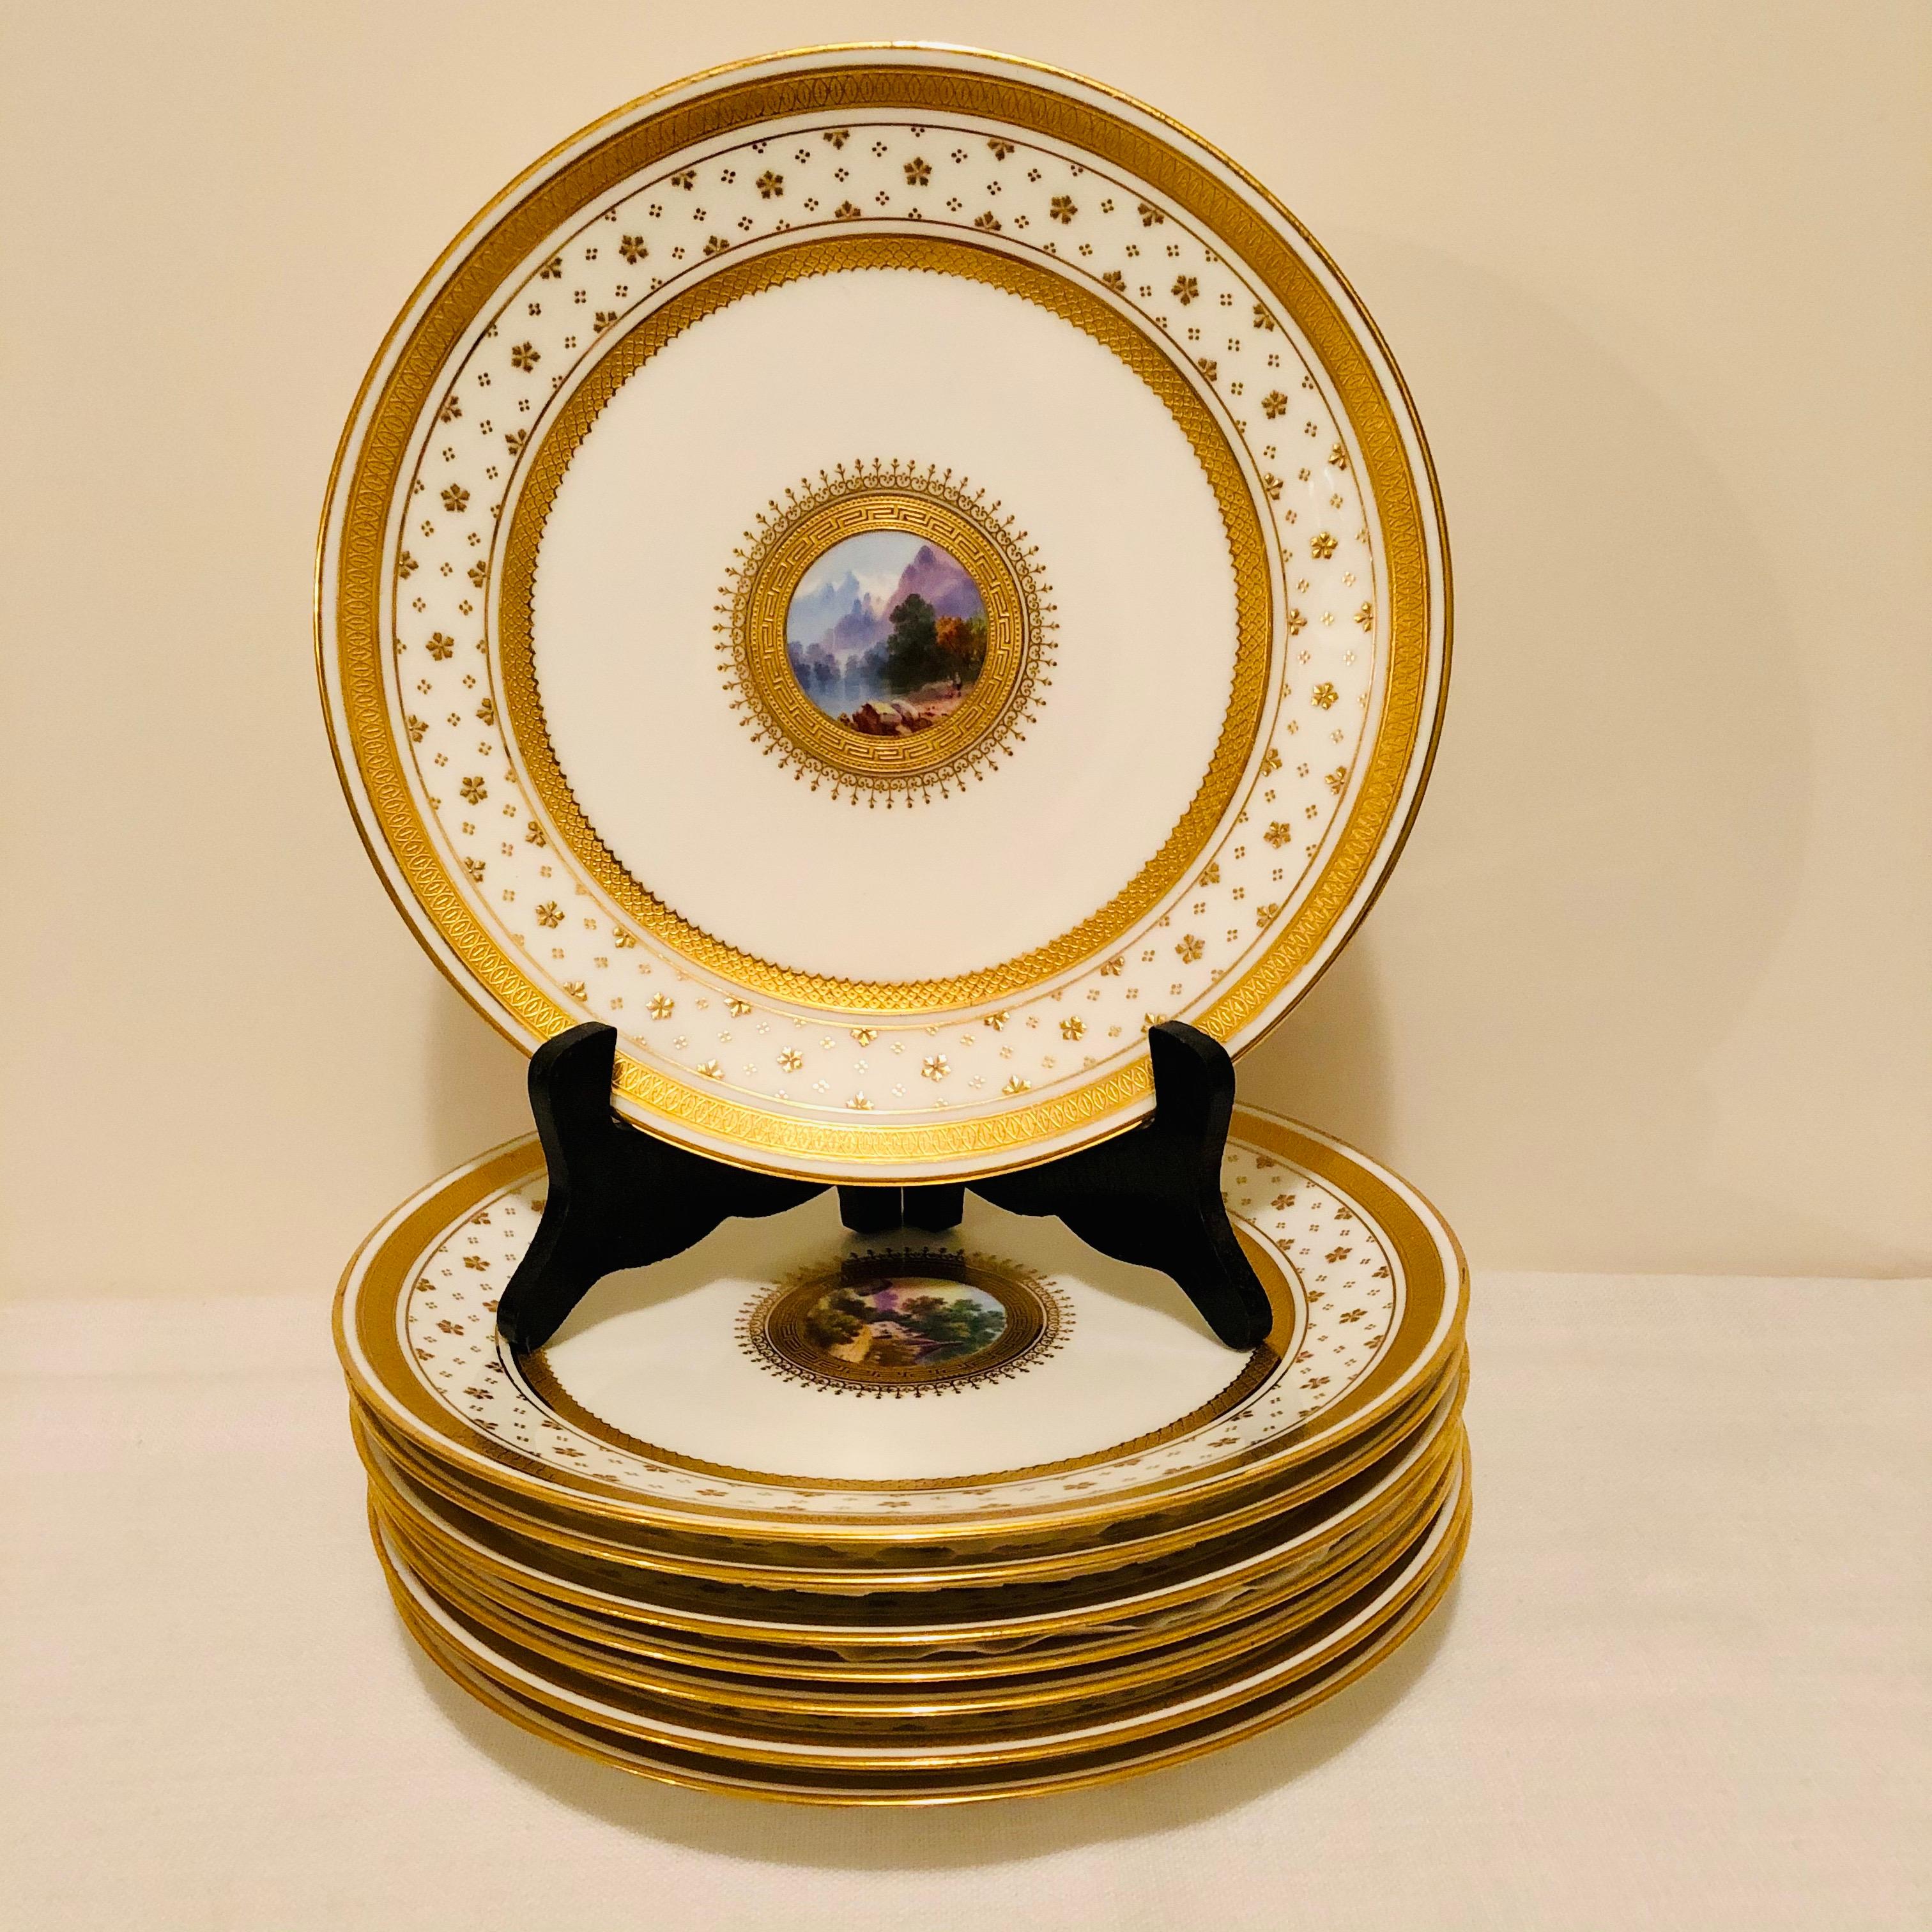 Look at the gorgeous hand painted scenes on this set of English Minton luncheon or dessert plates. The miniature paintings of the wonderful landscapes are painted by an extremely talented artist. The edges of the plates are embellished with small